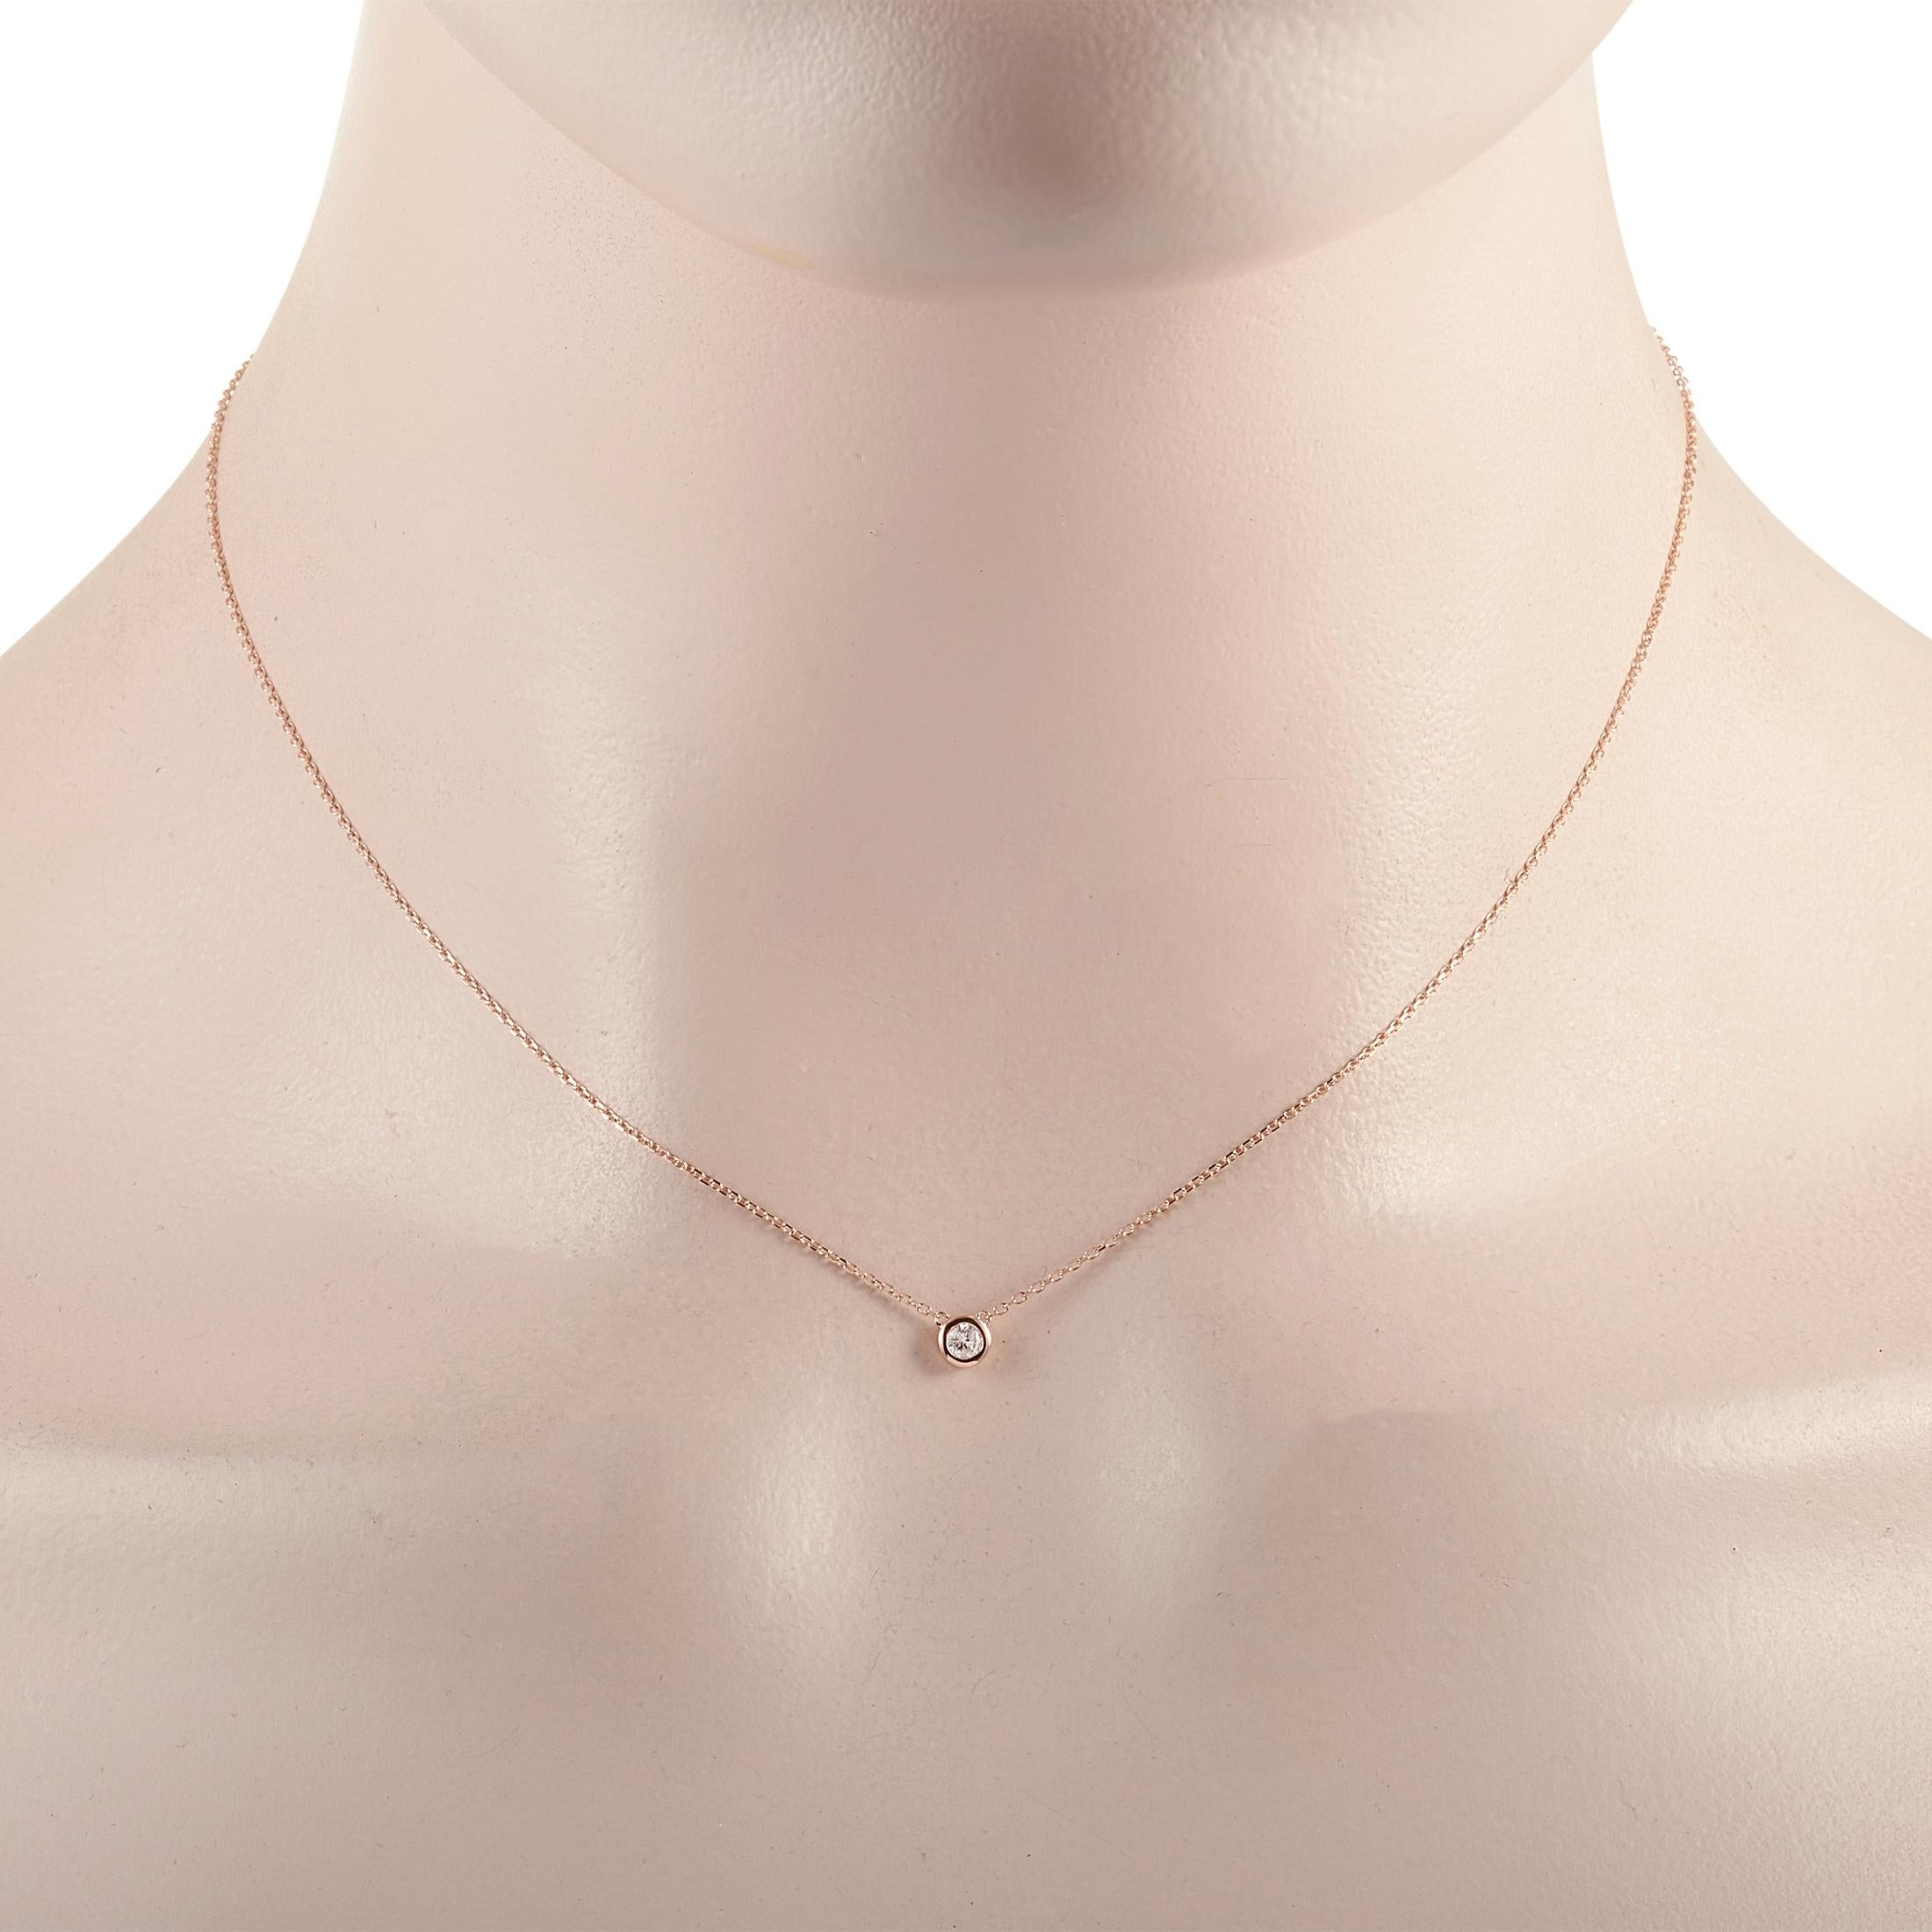 This LB Exclusive necklace is made of 14K rose gold and embellished with a 0.10 ct diamond stone. The necklace weighs 1.2 grams and boasts a 15” chain and a pendant that measures 0.13” in length and 0.13” in width.
 
 Offered in brand new condition,